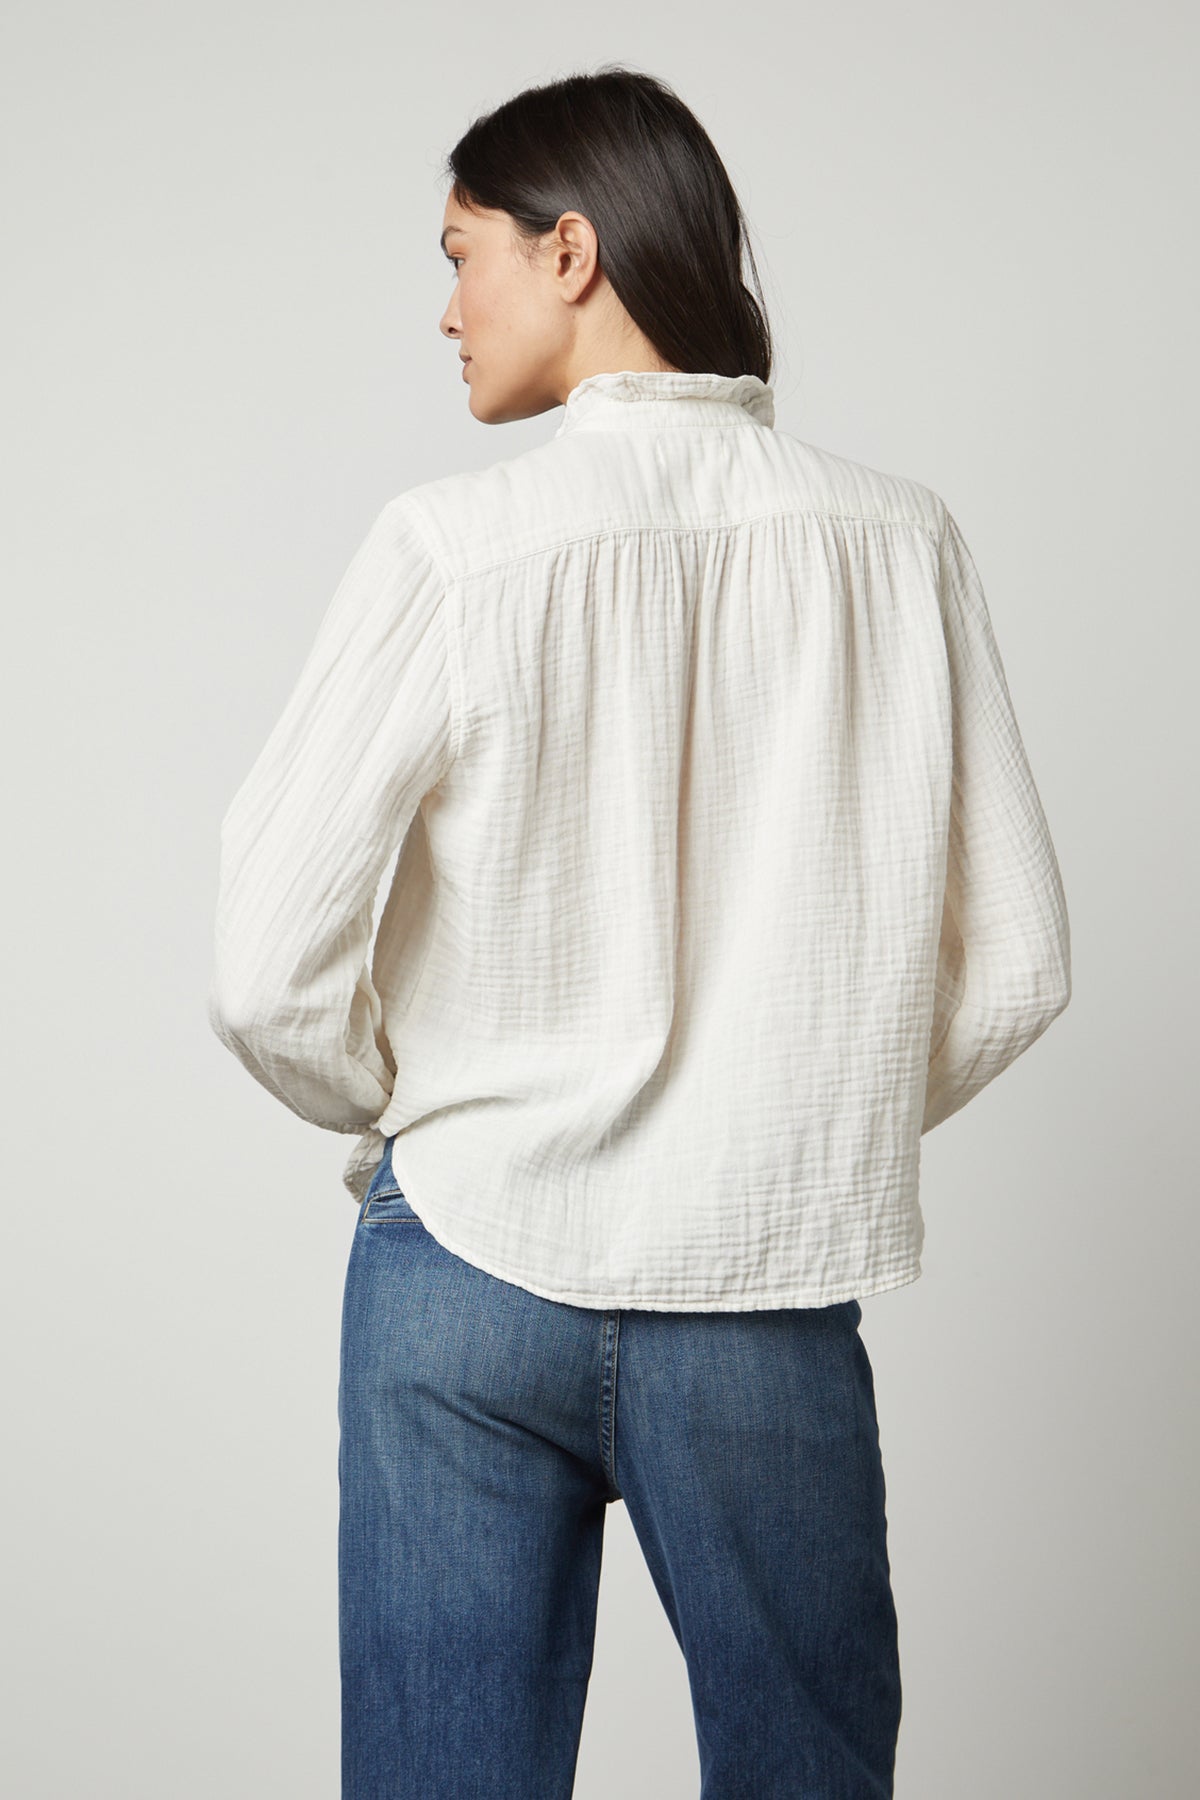 The back view of a woman wearing a TRISHA COTTON GAUZE TOP by Velvet by Graham & Spencer and jeans.-26872389042369